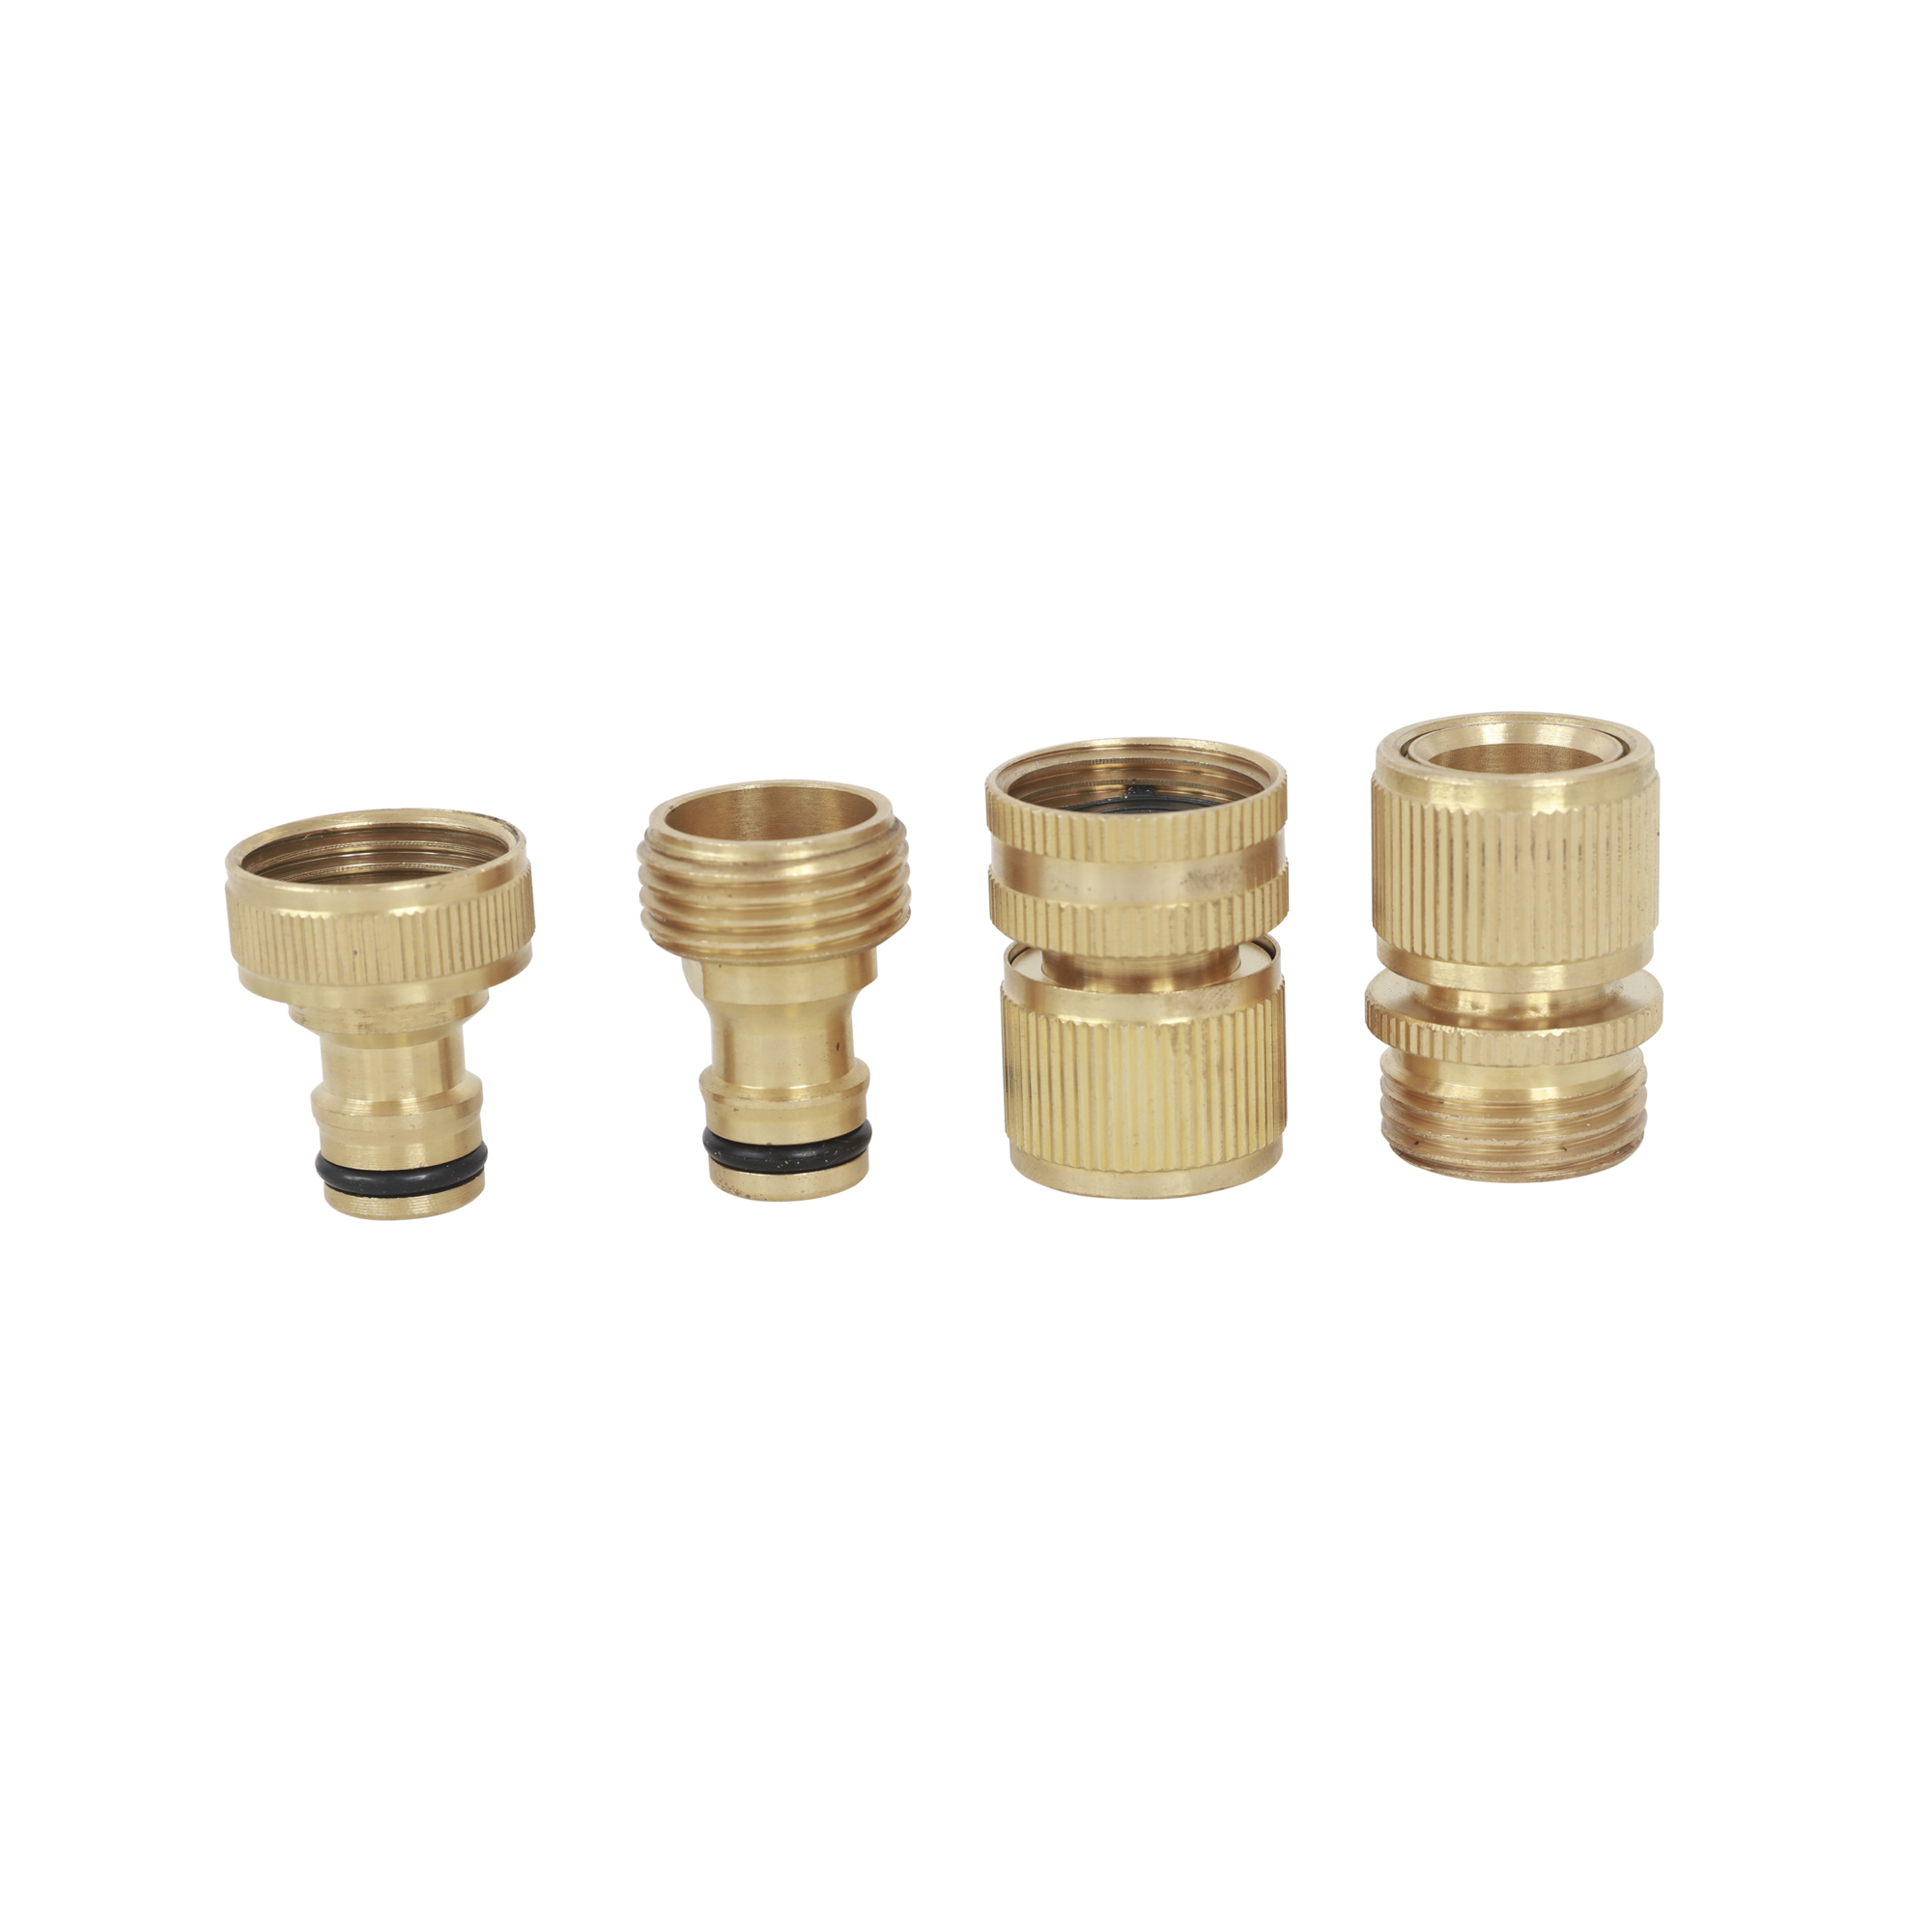 Strongway 4-Piece Quick-Connect Coupler Set, 3/4Inch, 60 PSI, 4 Model 202507009001